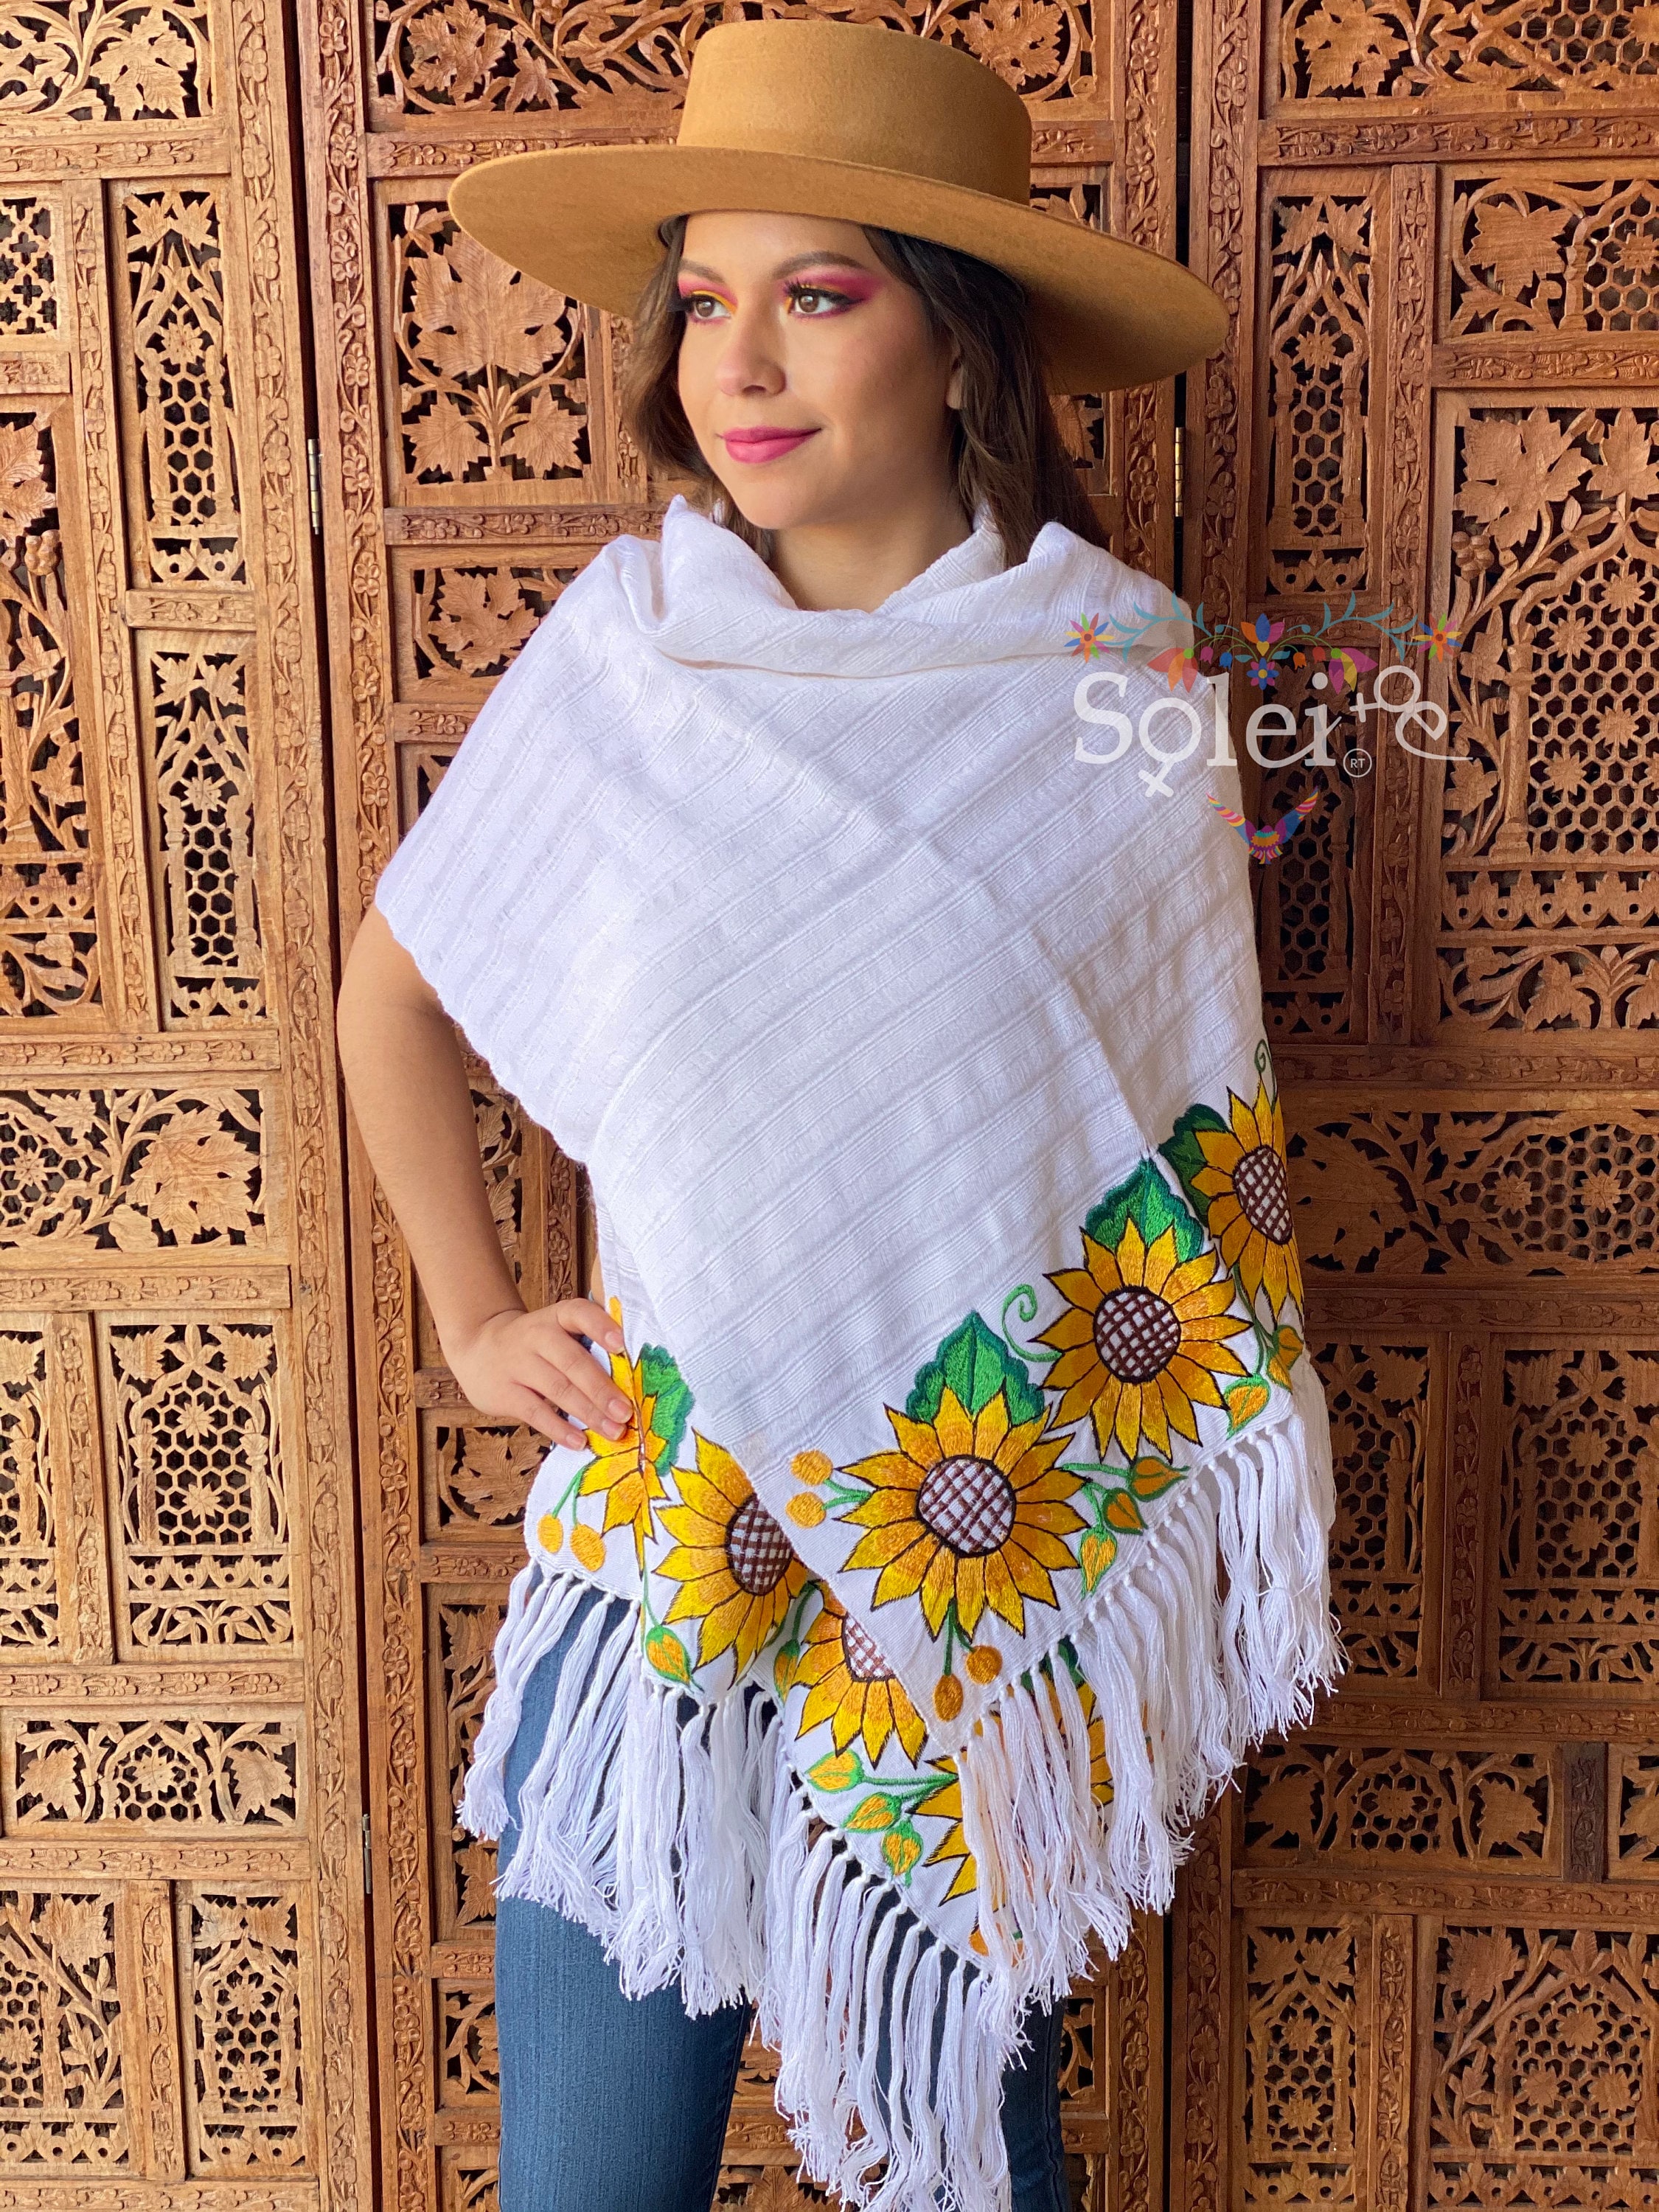 Cinco De Mayo Frida Kahlo Fiesta Mexican Handcrafted Rebozo Gaban Shawl Made By Hand By Artisans Christmas